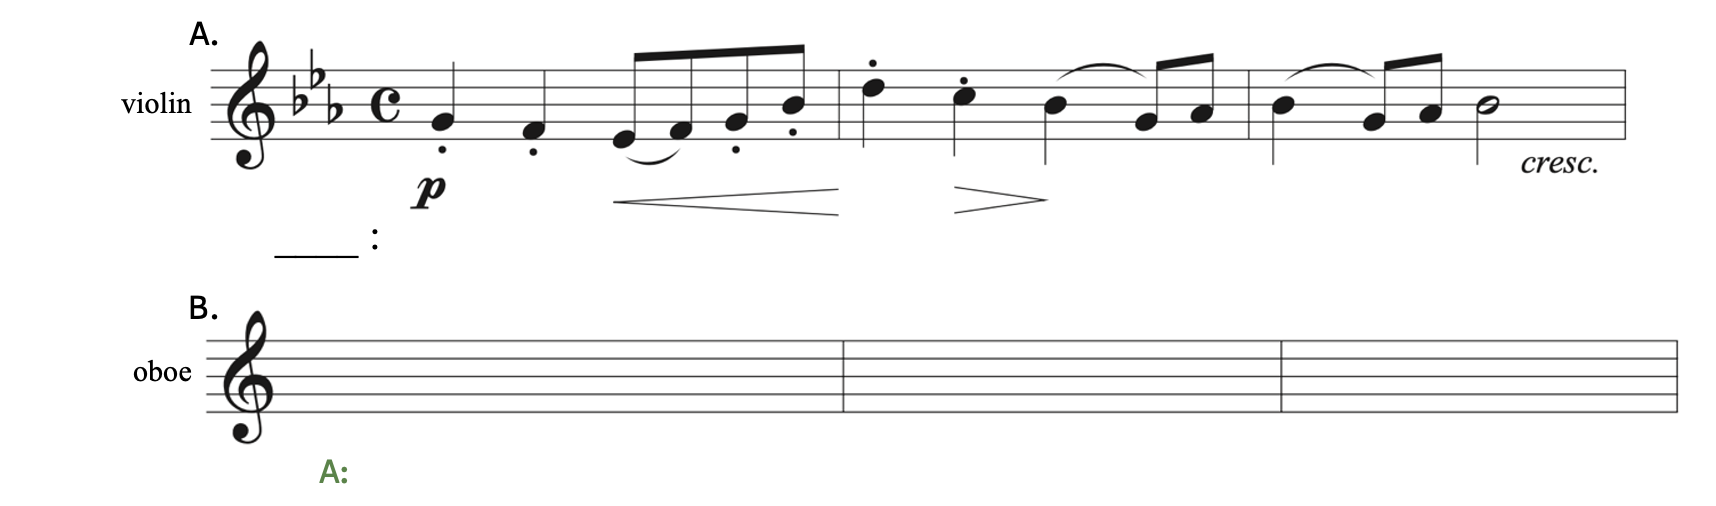 Transposing Munktell's Violin Sonata, first movement - Allegro non tanto, vigoroso. Example A is in treble clef in a key with 3 flats and you are to transpose to A major also in treble clef.